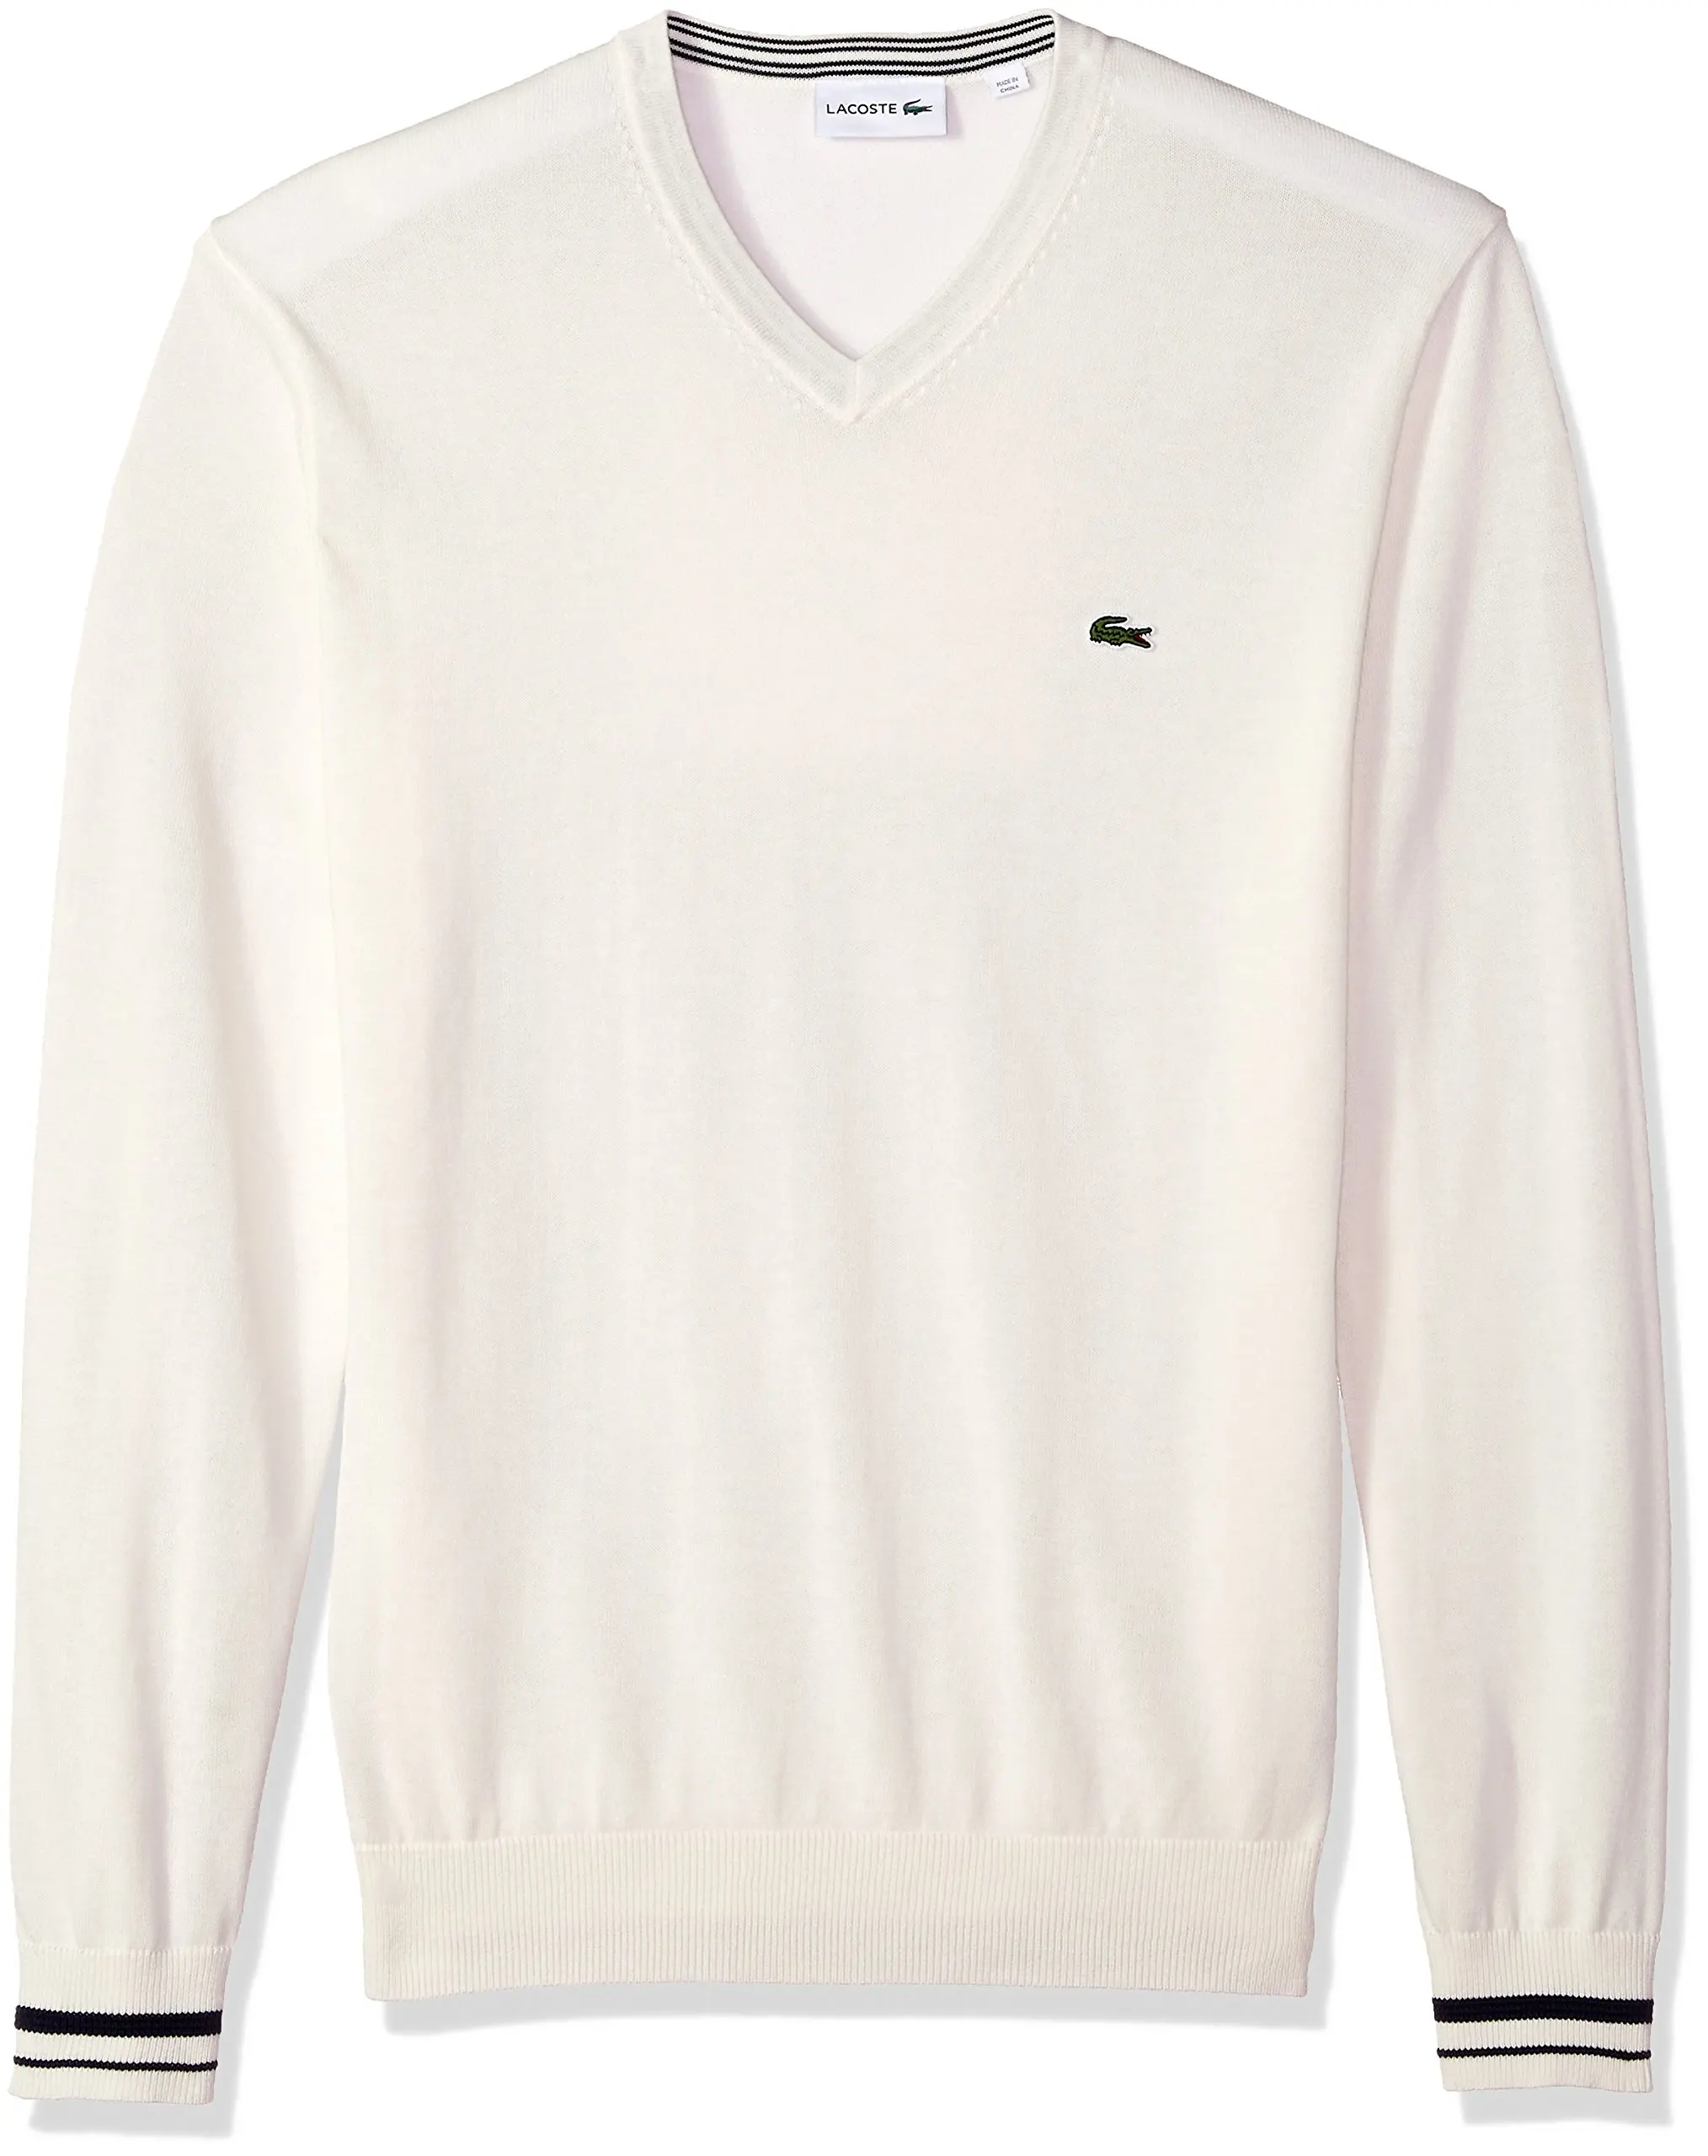 lacoste jersey price